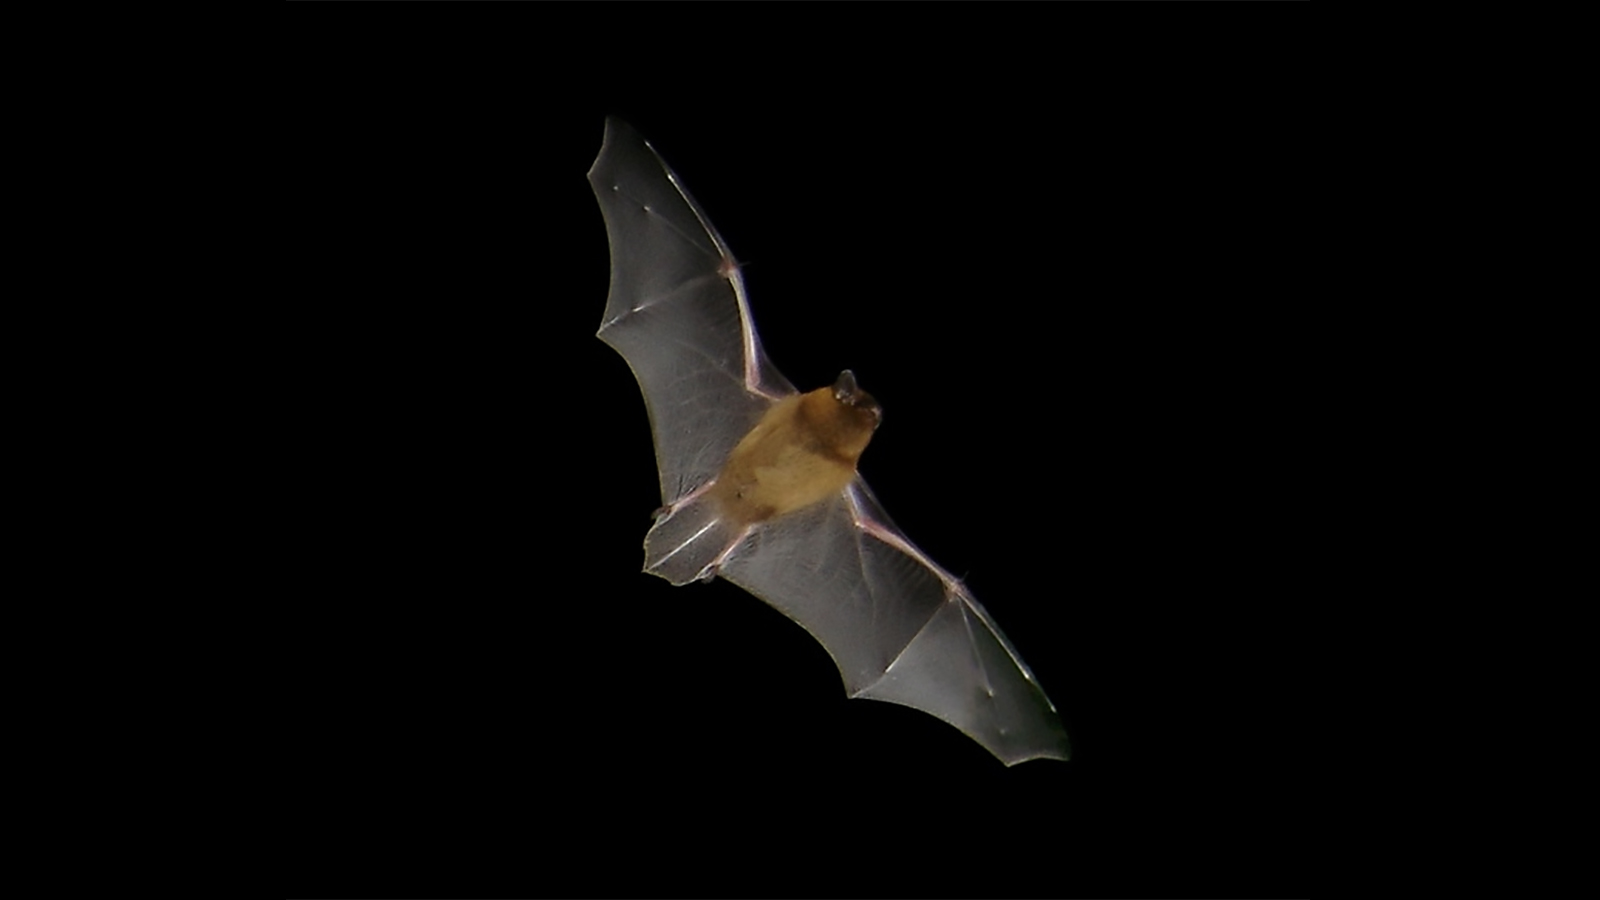 A Pipistrellus Nathusii Bat In Mid-flight Seen From Below Against A Totally Black Background